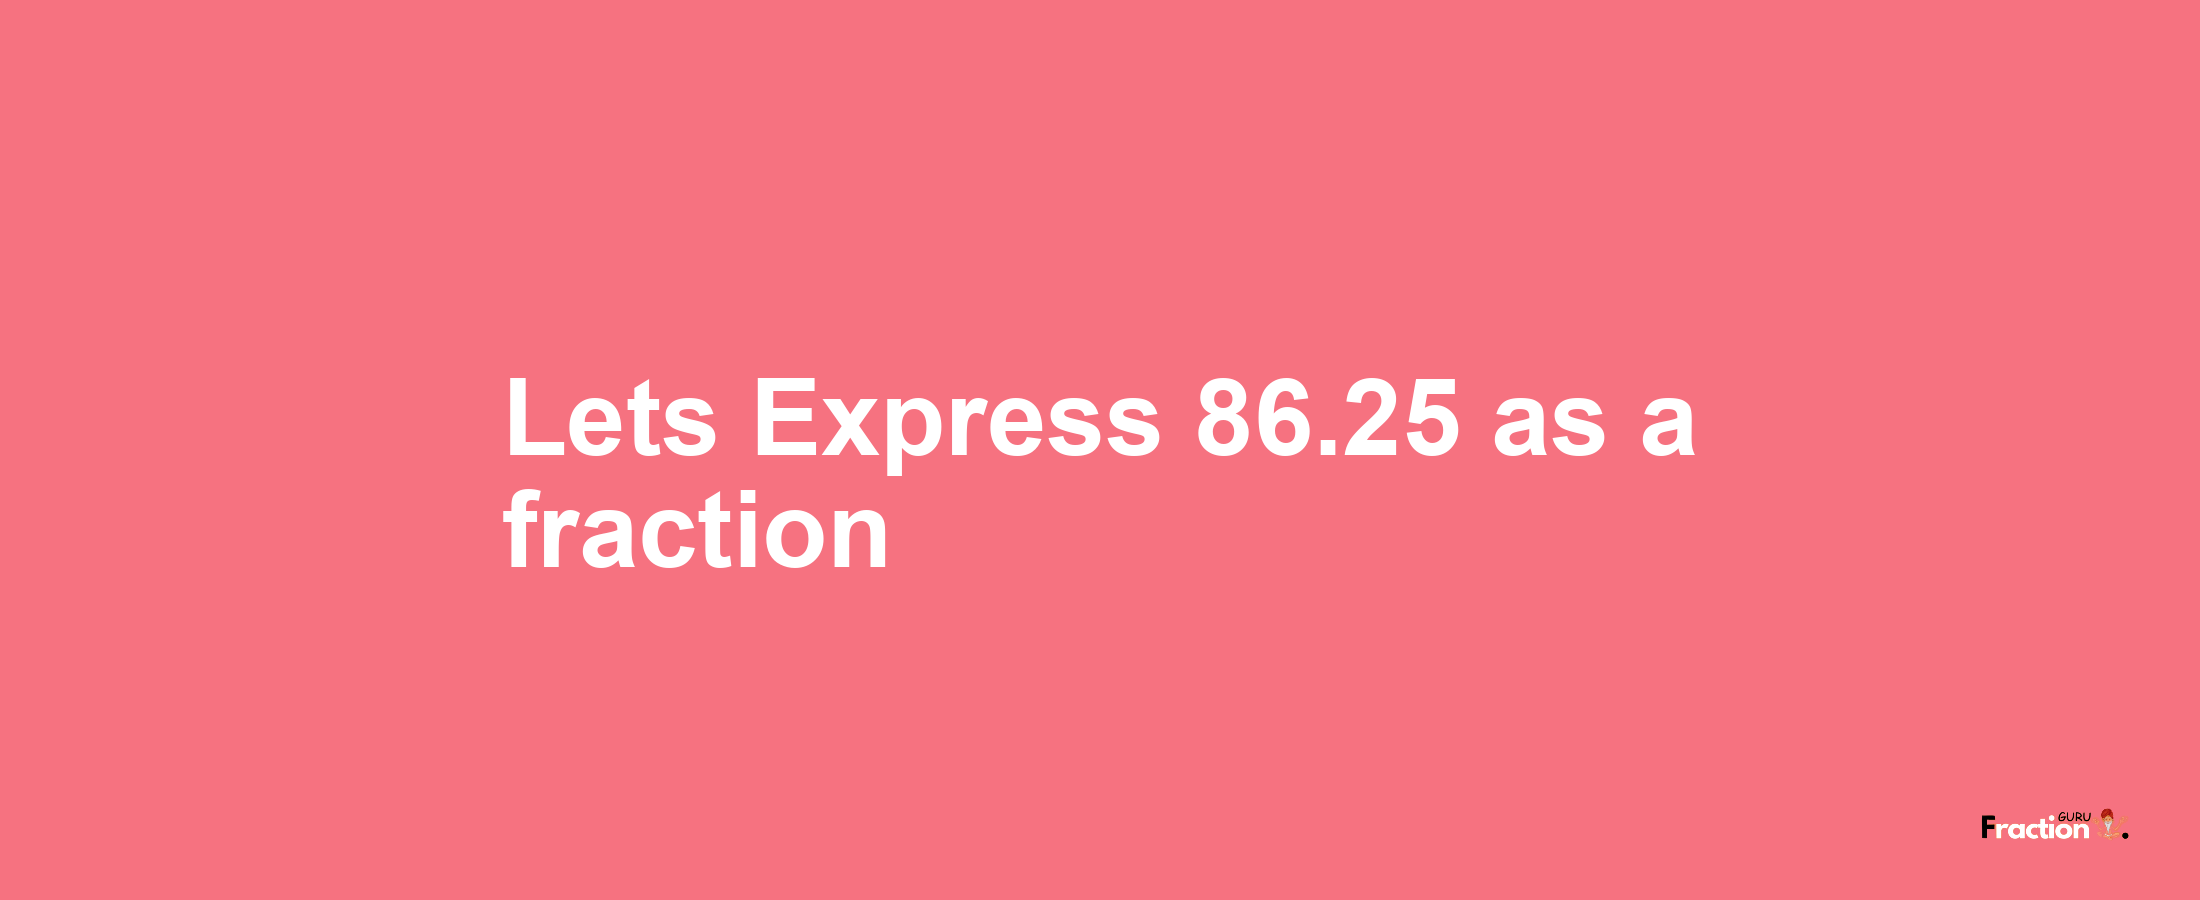 Lets Express 86.25 as afraction